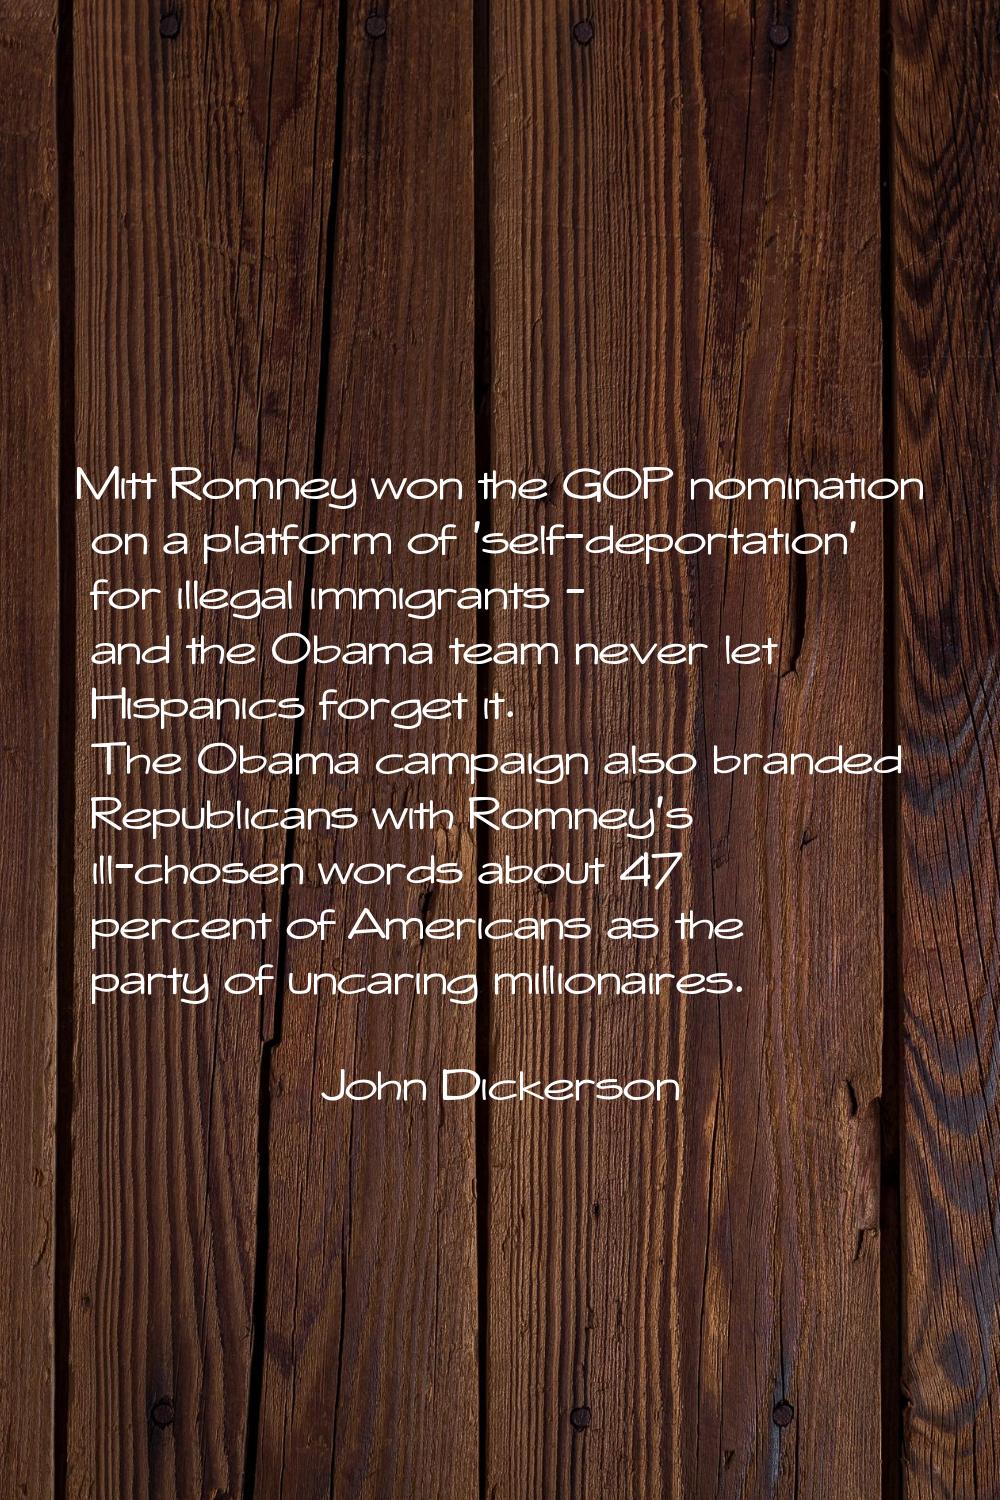 Mitt Romney won the GOP nomination on a platform of 'self-deportation' for illegal immigrants - and